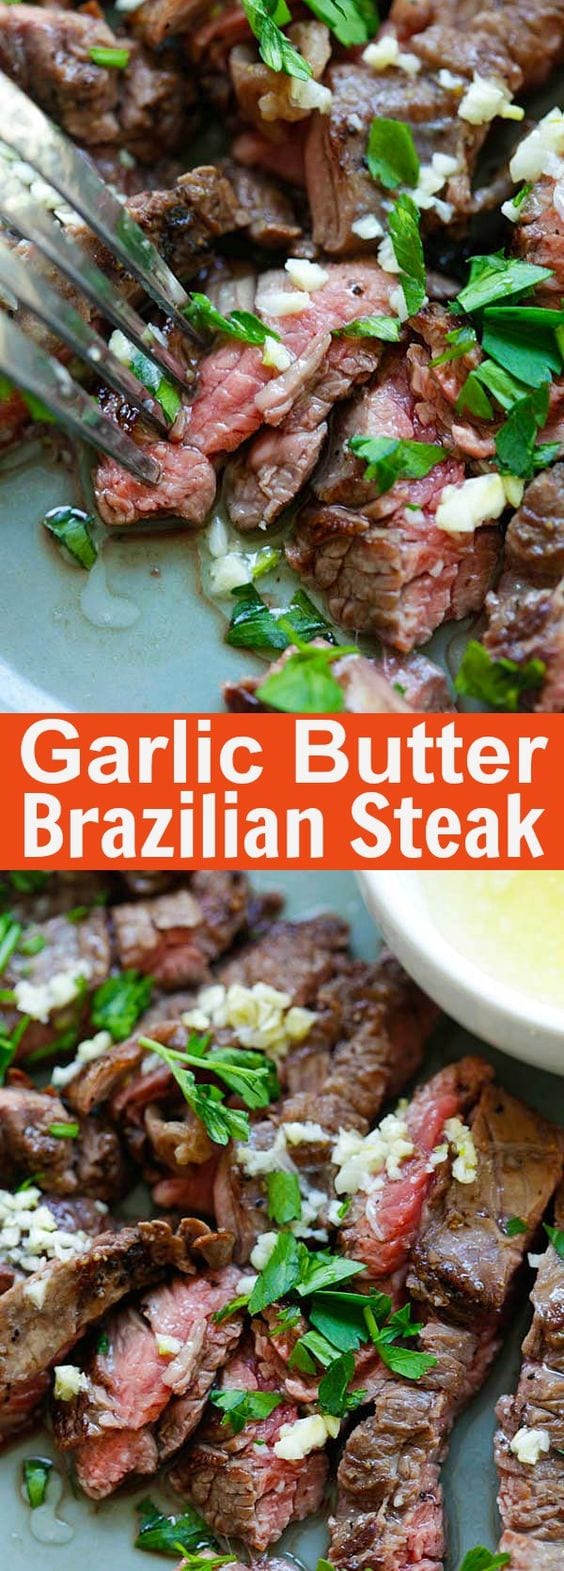 Garlic Butter Brazilian Steak – the juiciest and most tender steak with a golden garlic butter sauce. Takes 15 minutes and dinner is ready | rasamalaysia.com